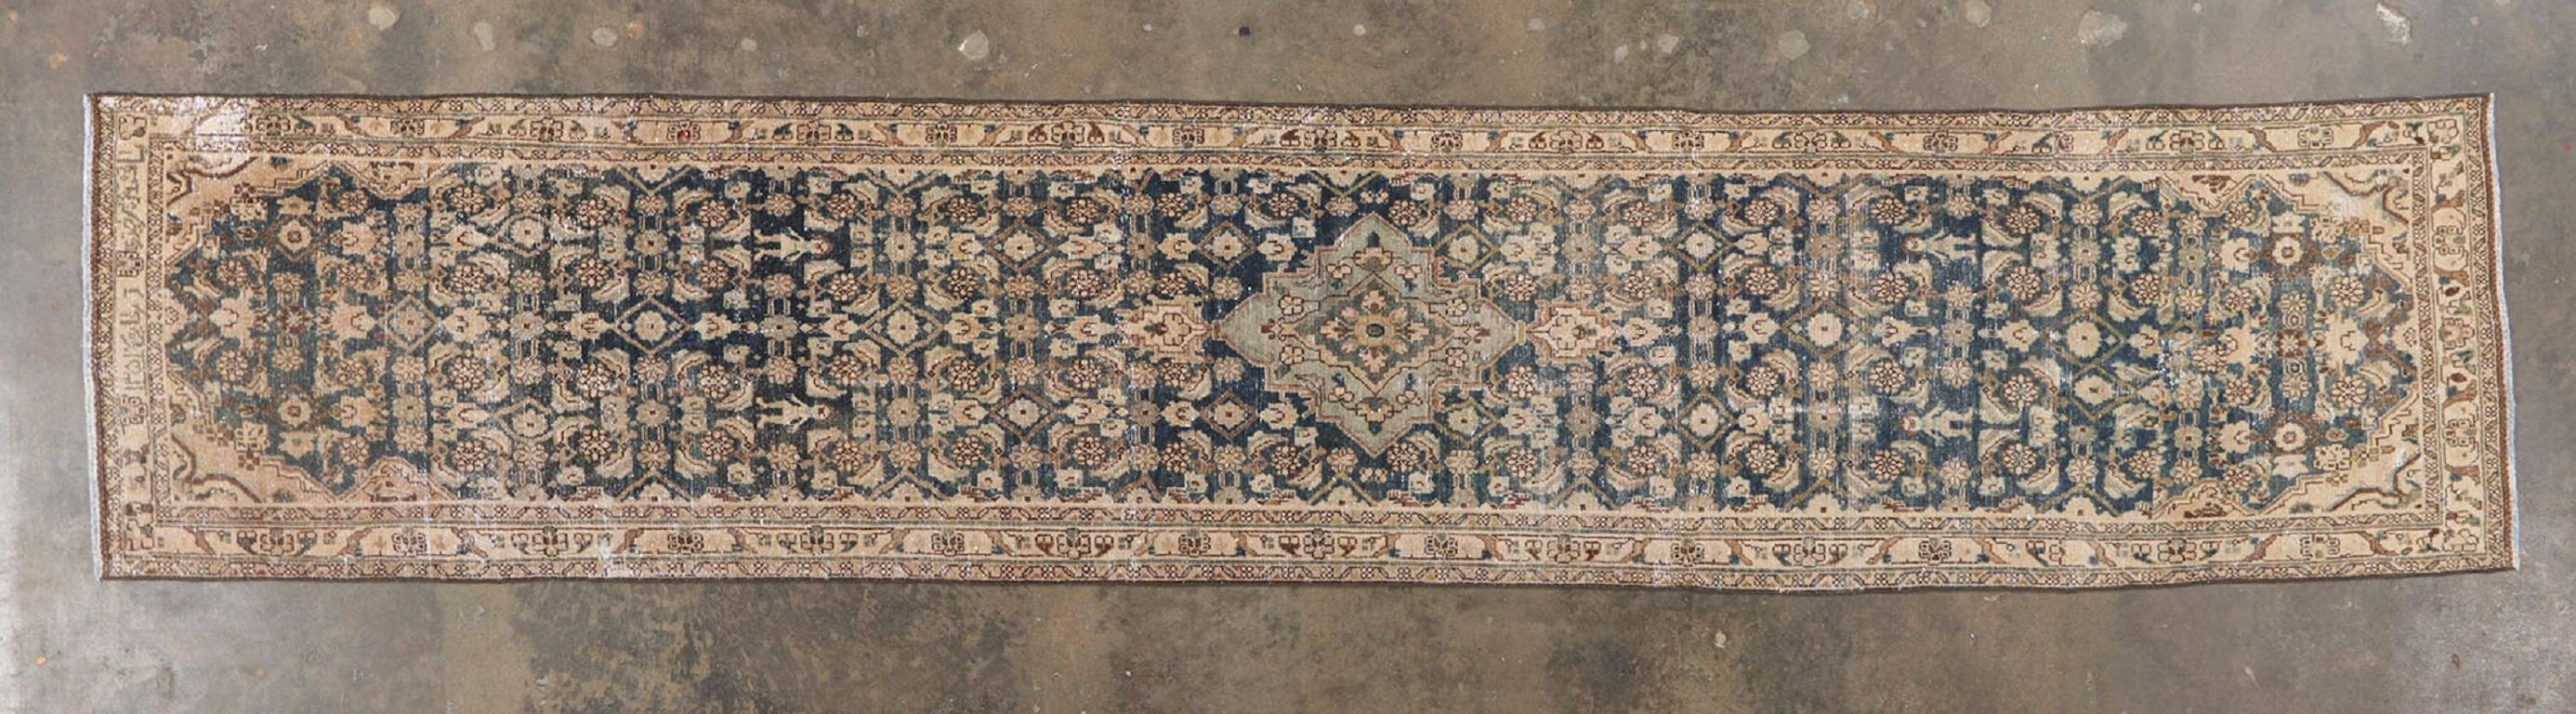 Distressed Antique Persian Malayer Runner with Herati Design & Human Figures For Sale 2